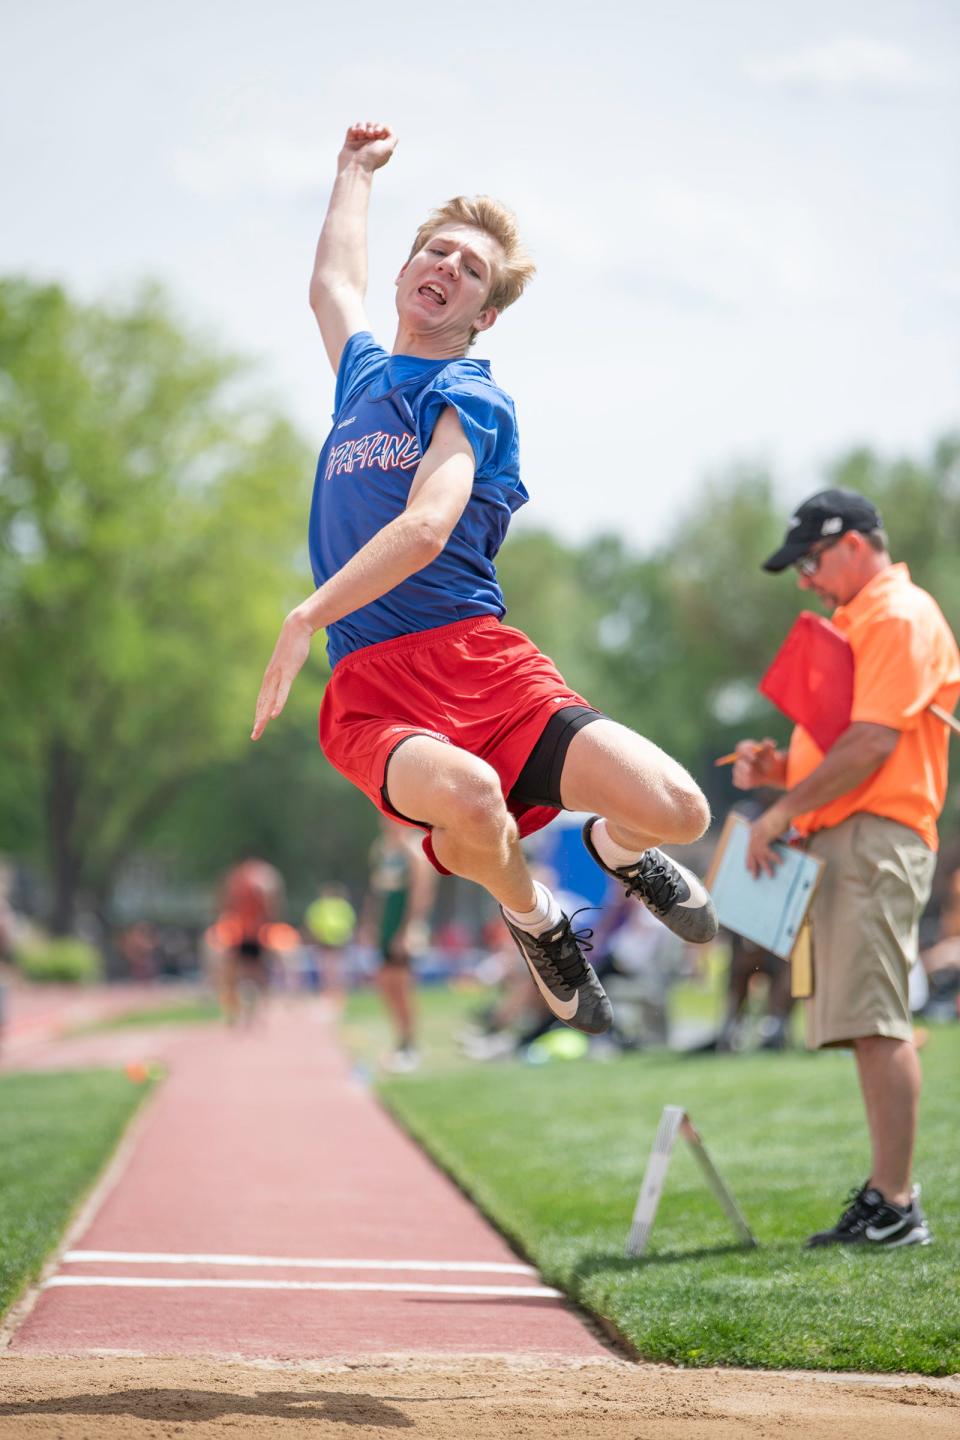 Swallows Charter Academy's Stephen Wietzke flys through the air during the Class 2A long jump finals at the state track and field meet on Thursday, May 19, 2022 at Jeffco Stadium.